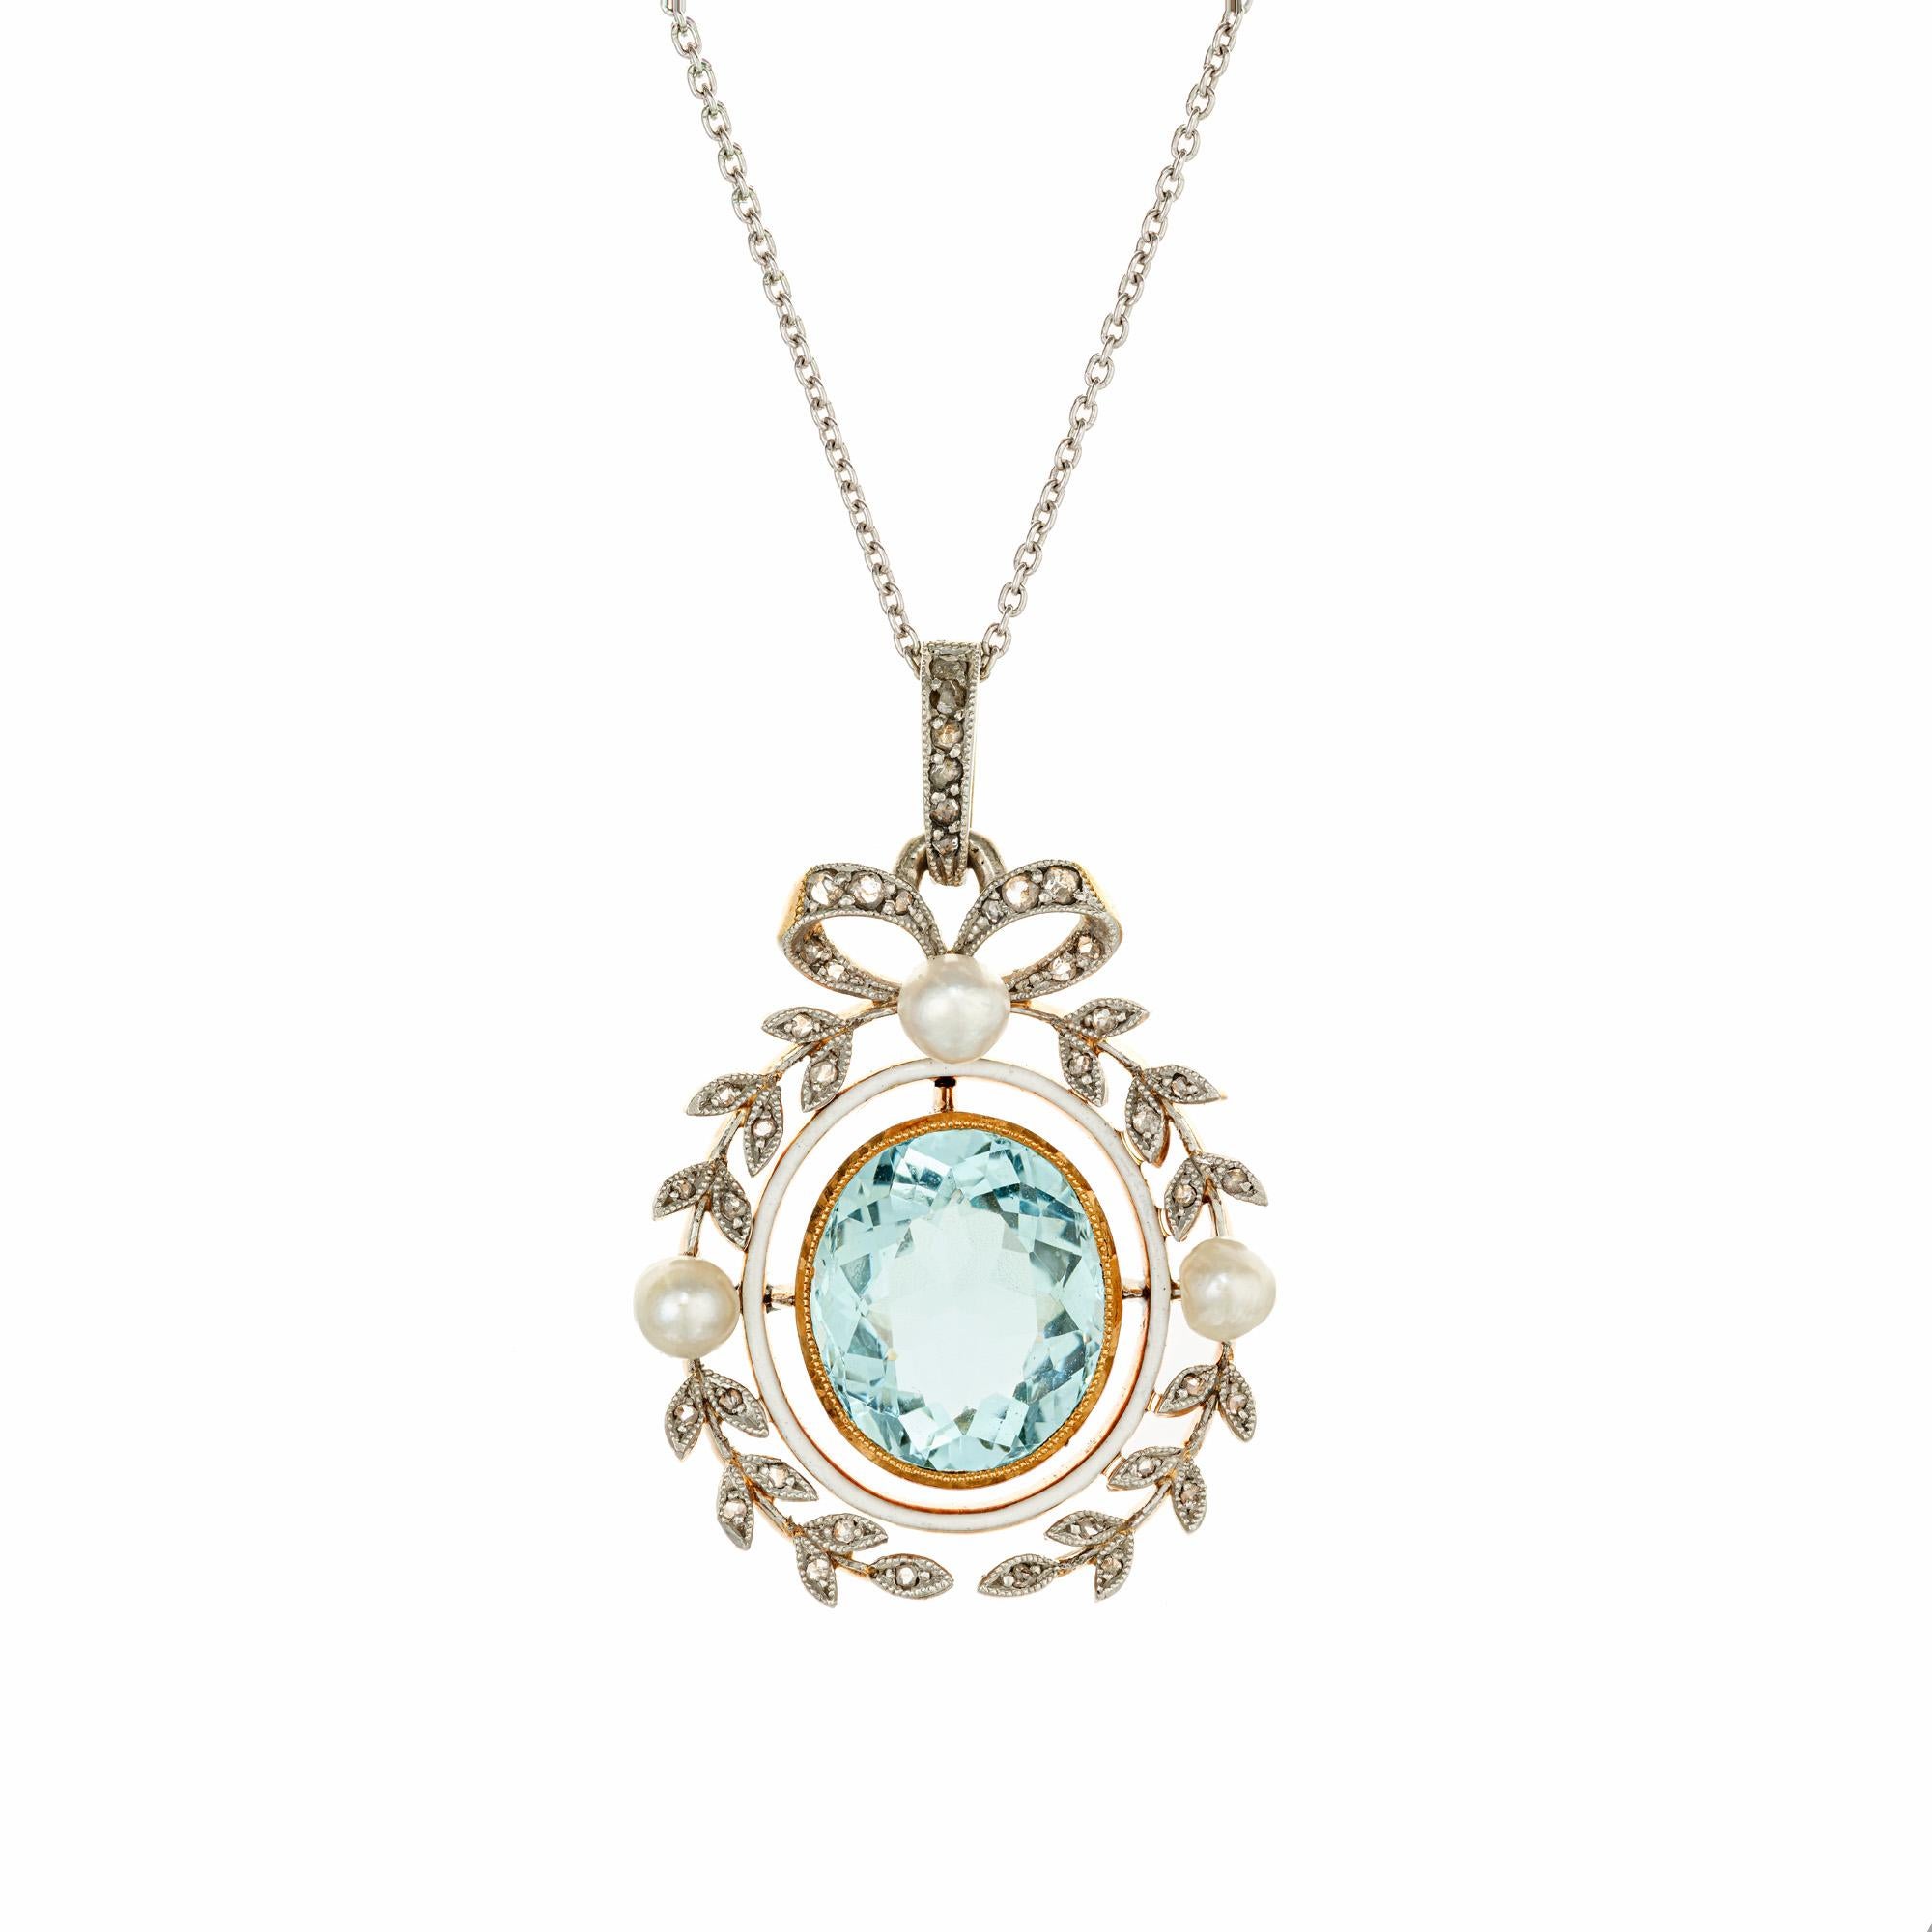 1860's civil war era handmade aqua, pearl and diamond pendant necklace. 7.00ct oval, light blue aqua center stone, set in a platinum and 14k yellow gold setting with 3 GIA certified natural white saltwater pearls, accented with 42 rose cut diamonds.